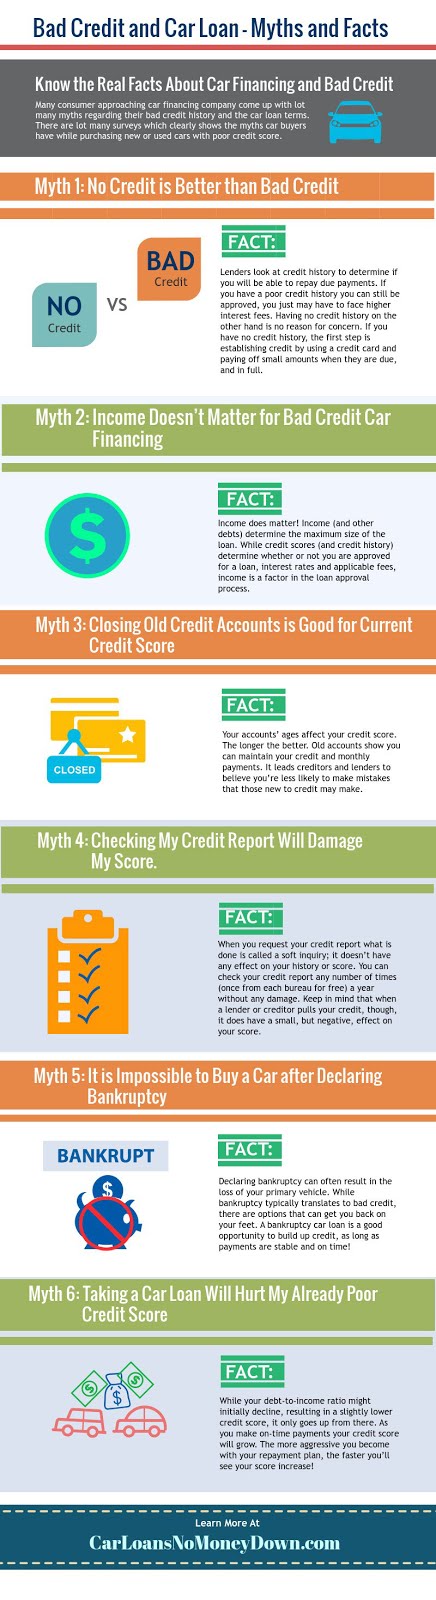 Myths & Facts About Bad Credit